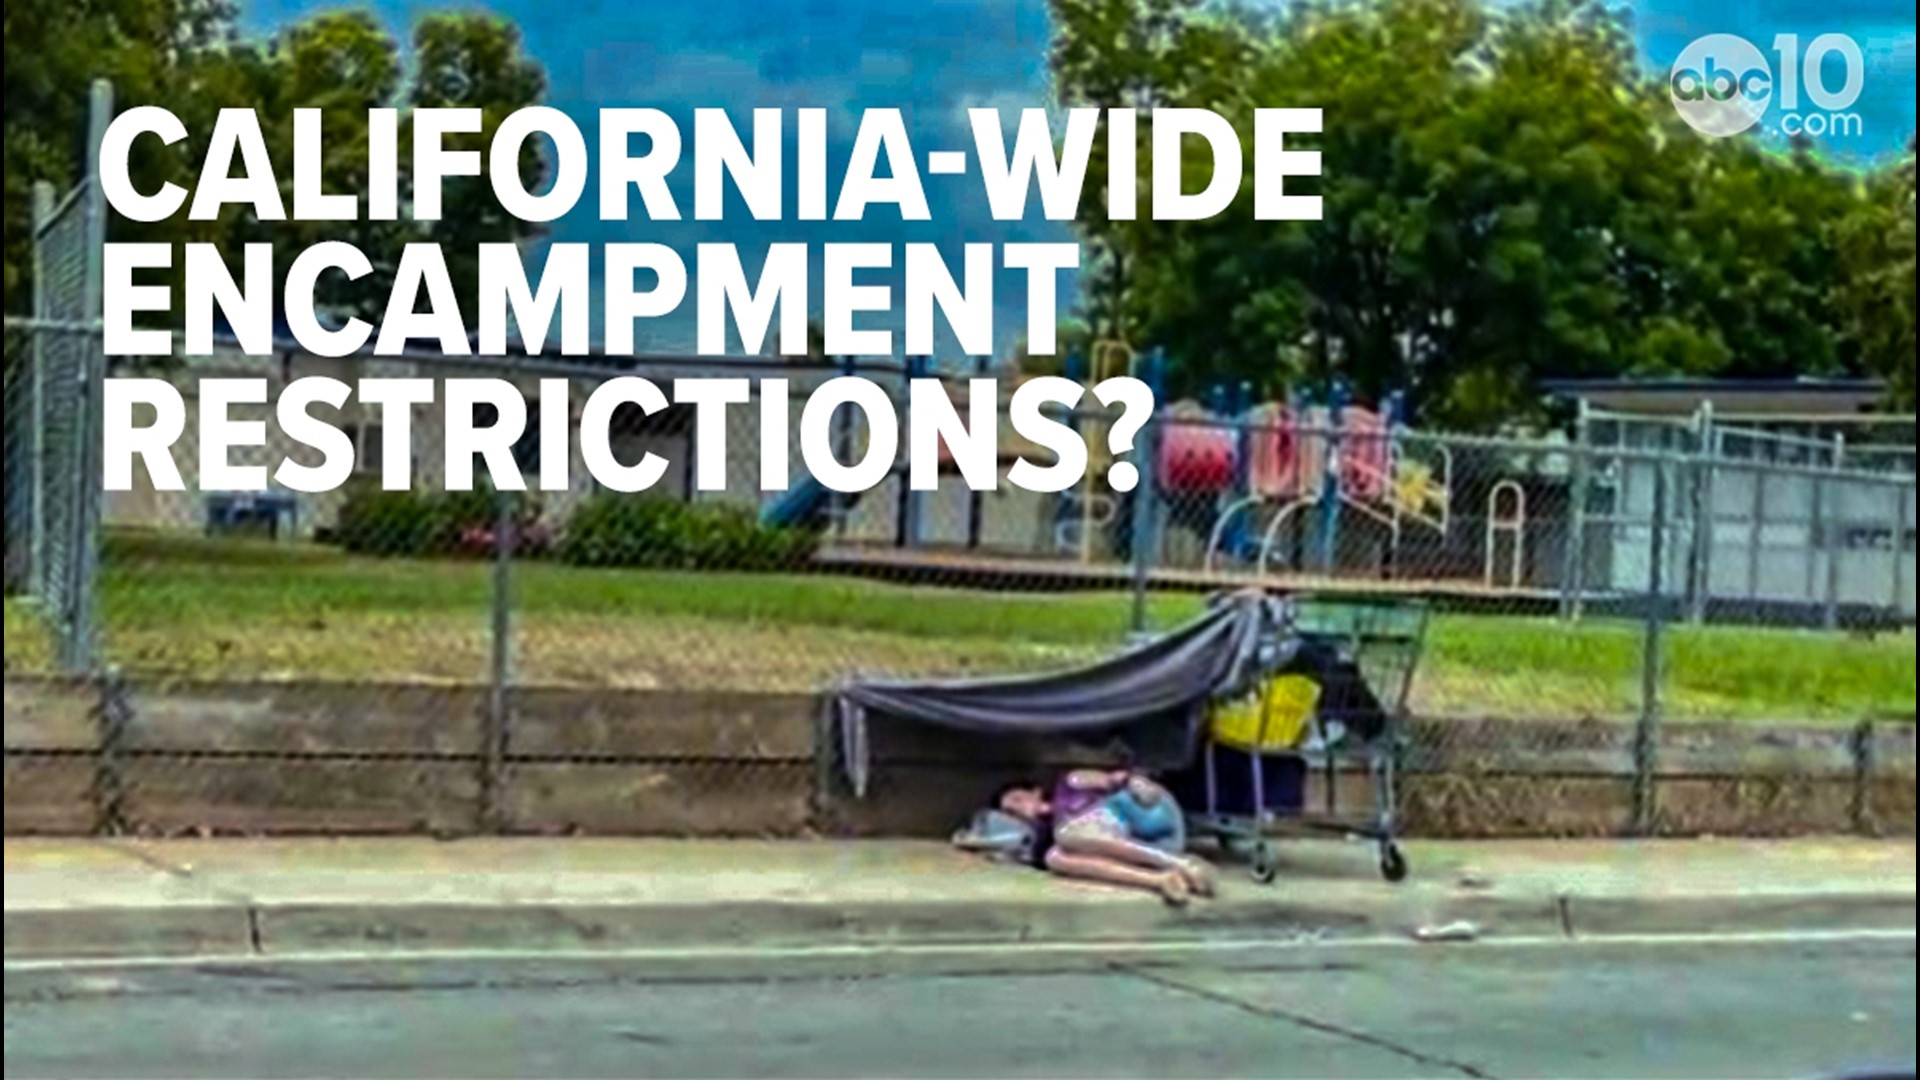 While Republican leader and State Senator Brian Jones wants to make encampments illegal in sensitive areas, he said it's up to the cities to enforce it.